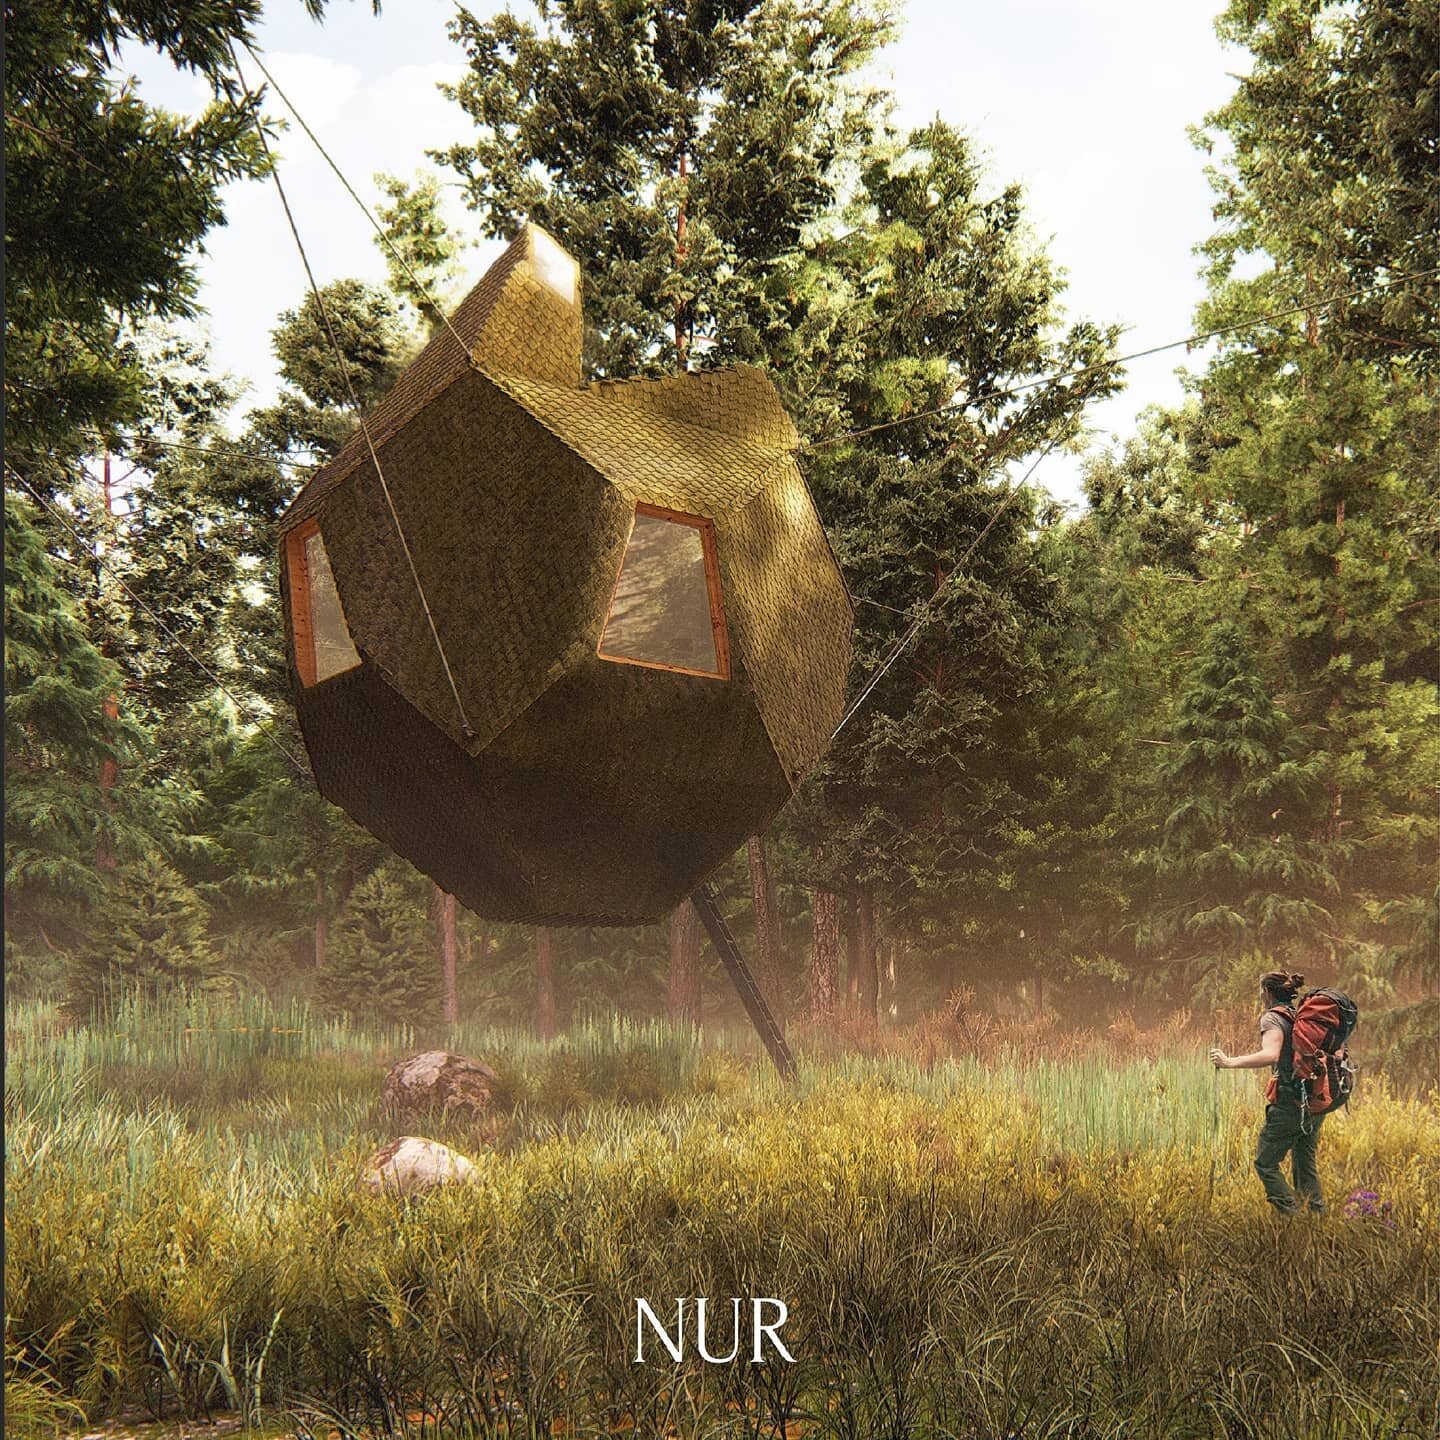 Nur is a #vipassana meditation cabin suspended within a forest designed for one person to immerse themselves in self-discovery and natural delight 
*
Rendering of the approach the elevated structure.. swipe to see how its assembled and the cross-sect